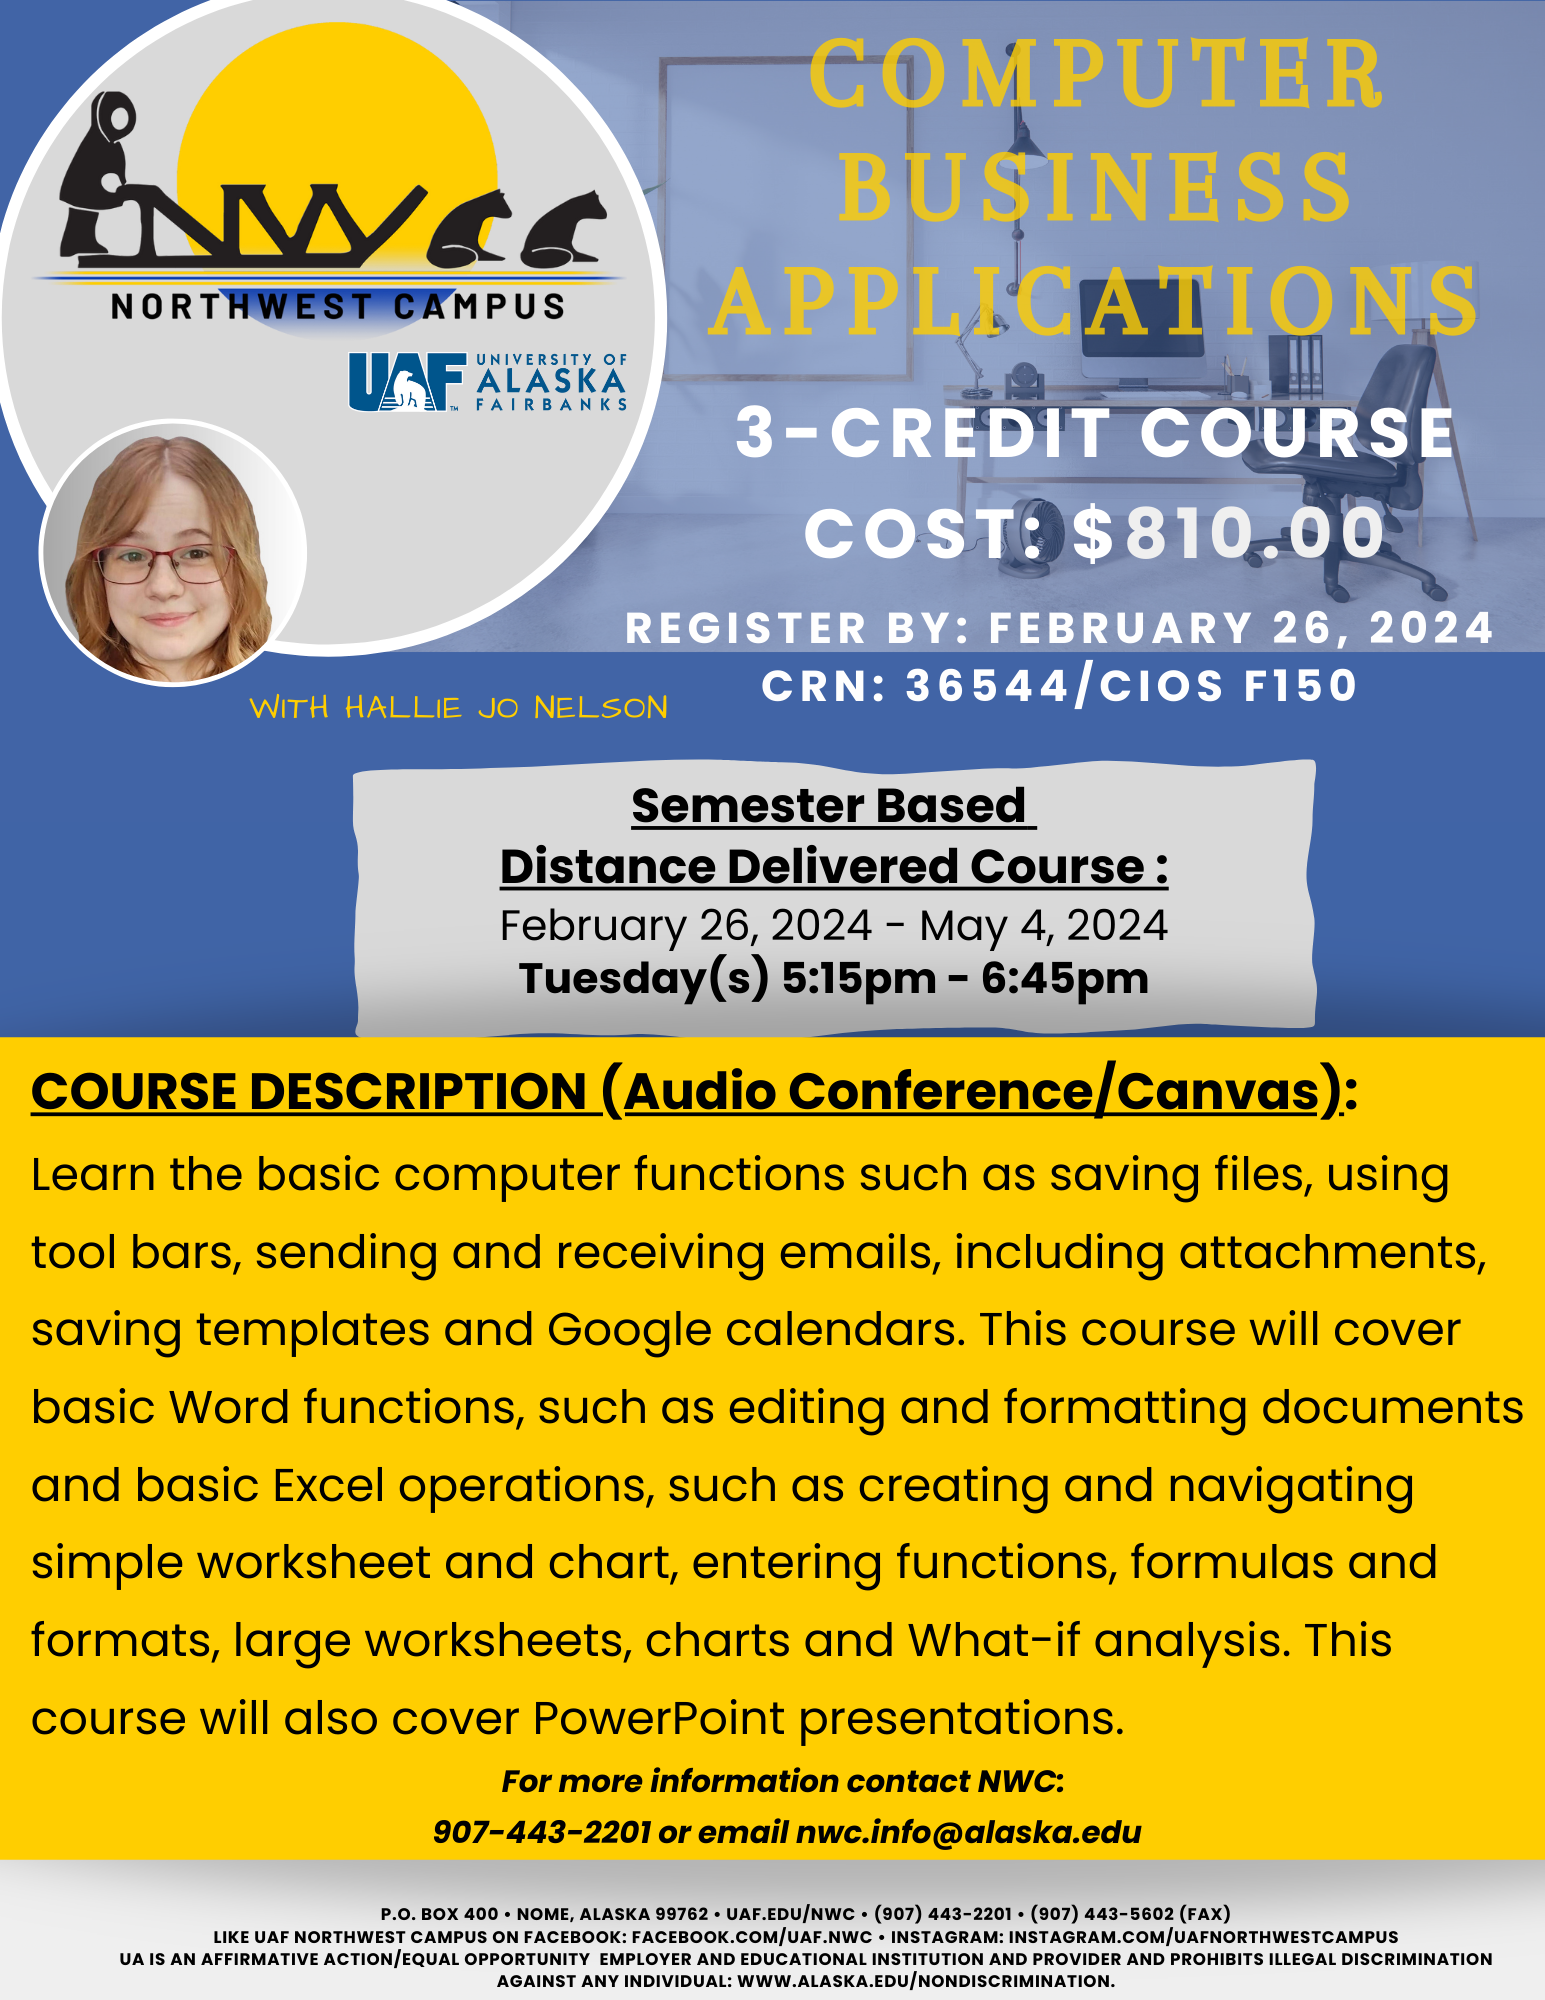 Computer Business Applications Flyer